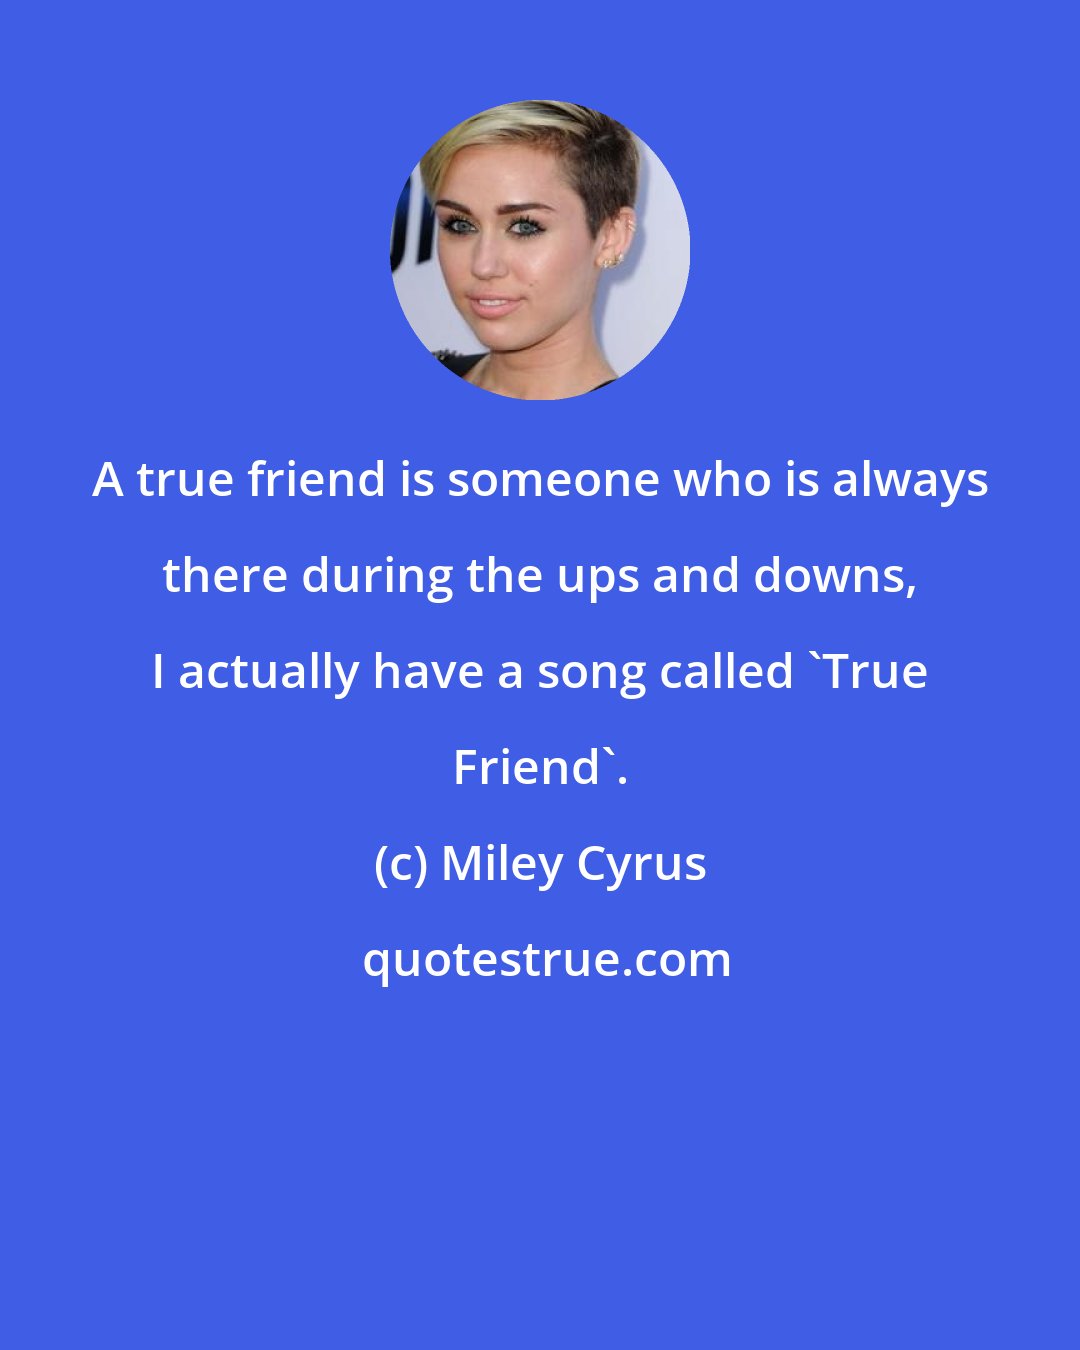 Miley Cyrus: A true friend is someone who is always there during the ups and downs, I actually have a song called 'True Friend'.